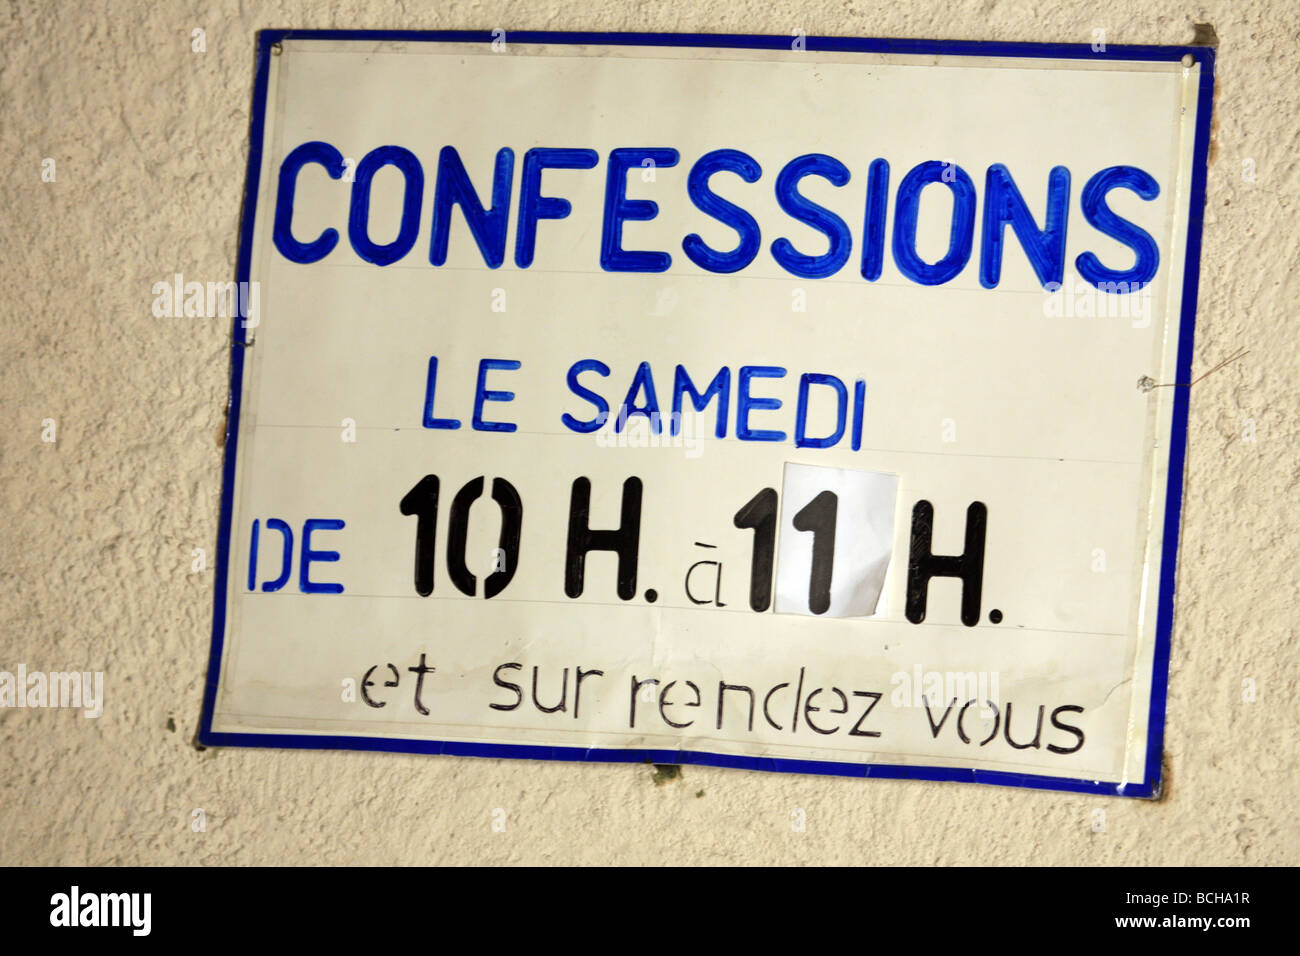 Confessions sign in cathedral Stock Photo